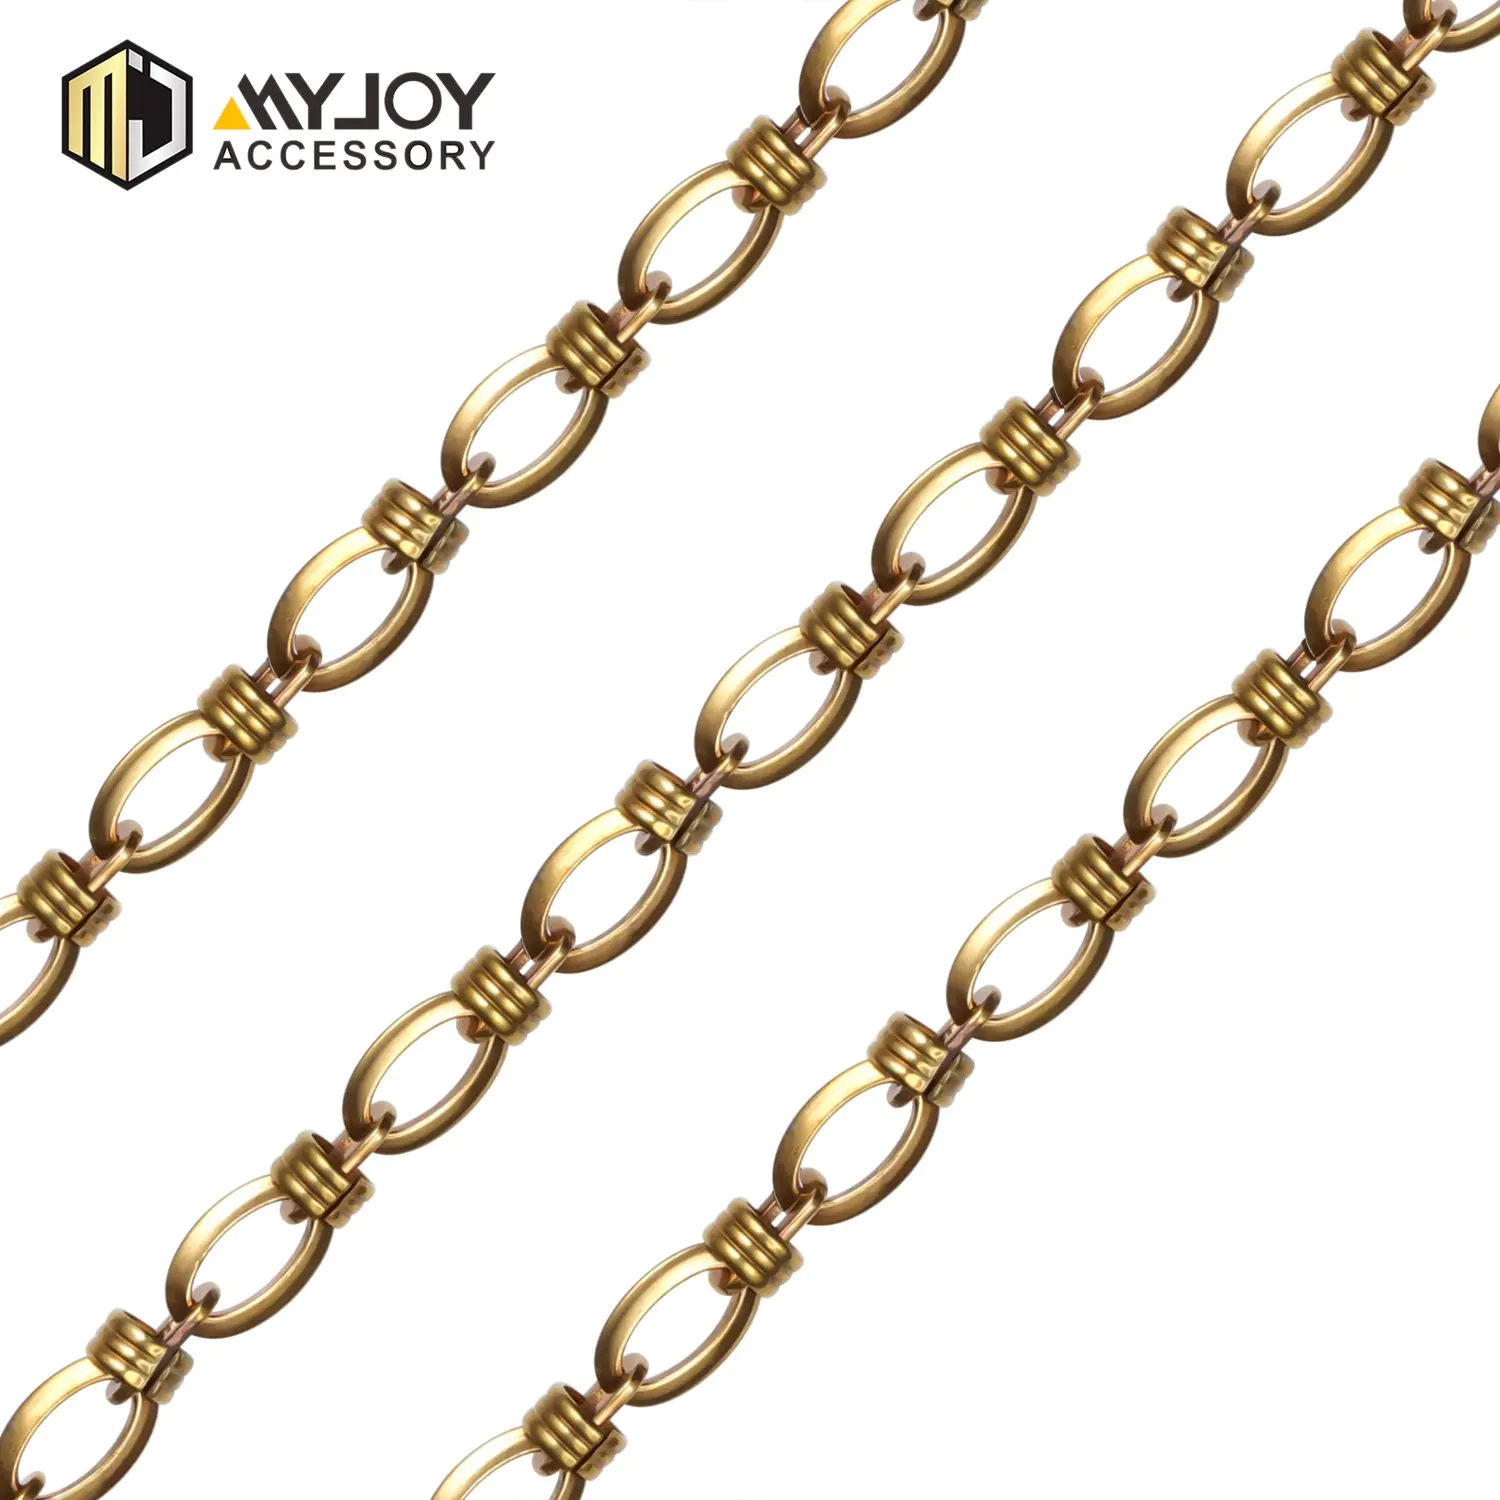 MYJOY vogue purse chain Supply for purses